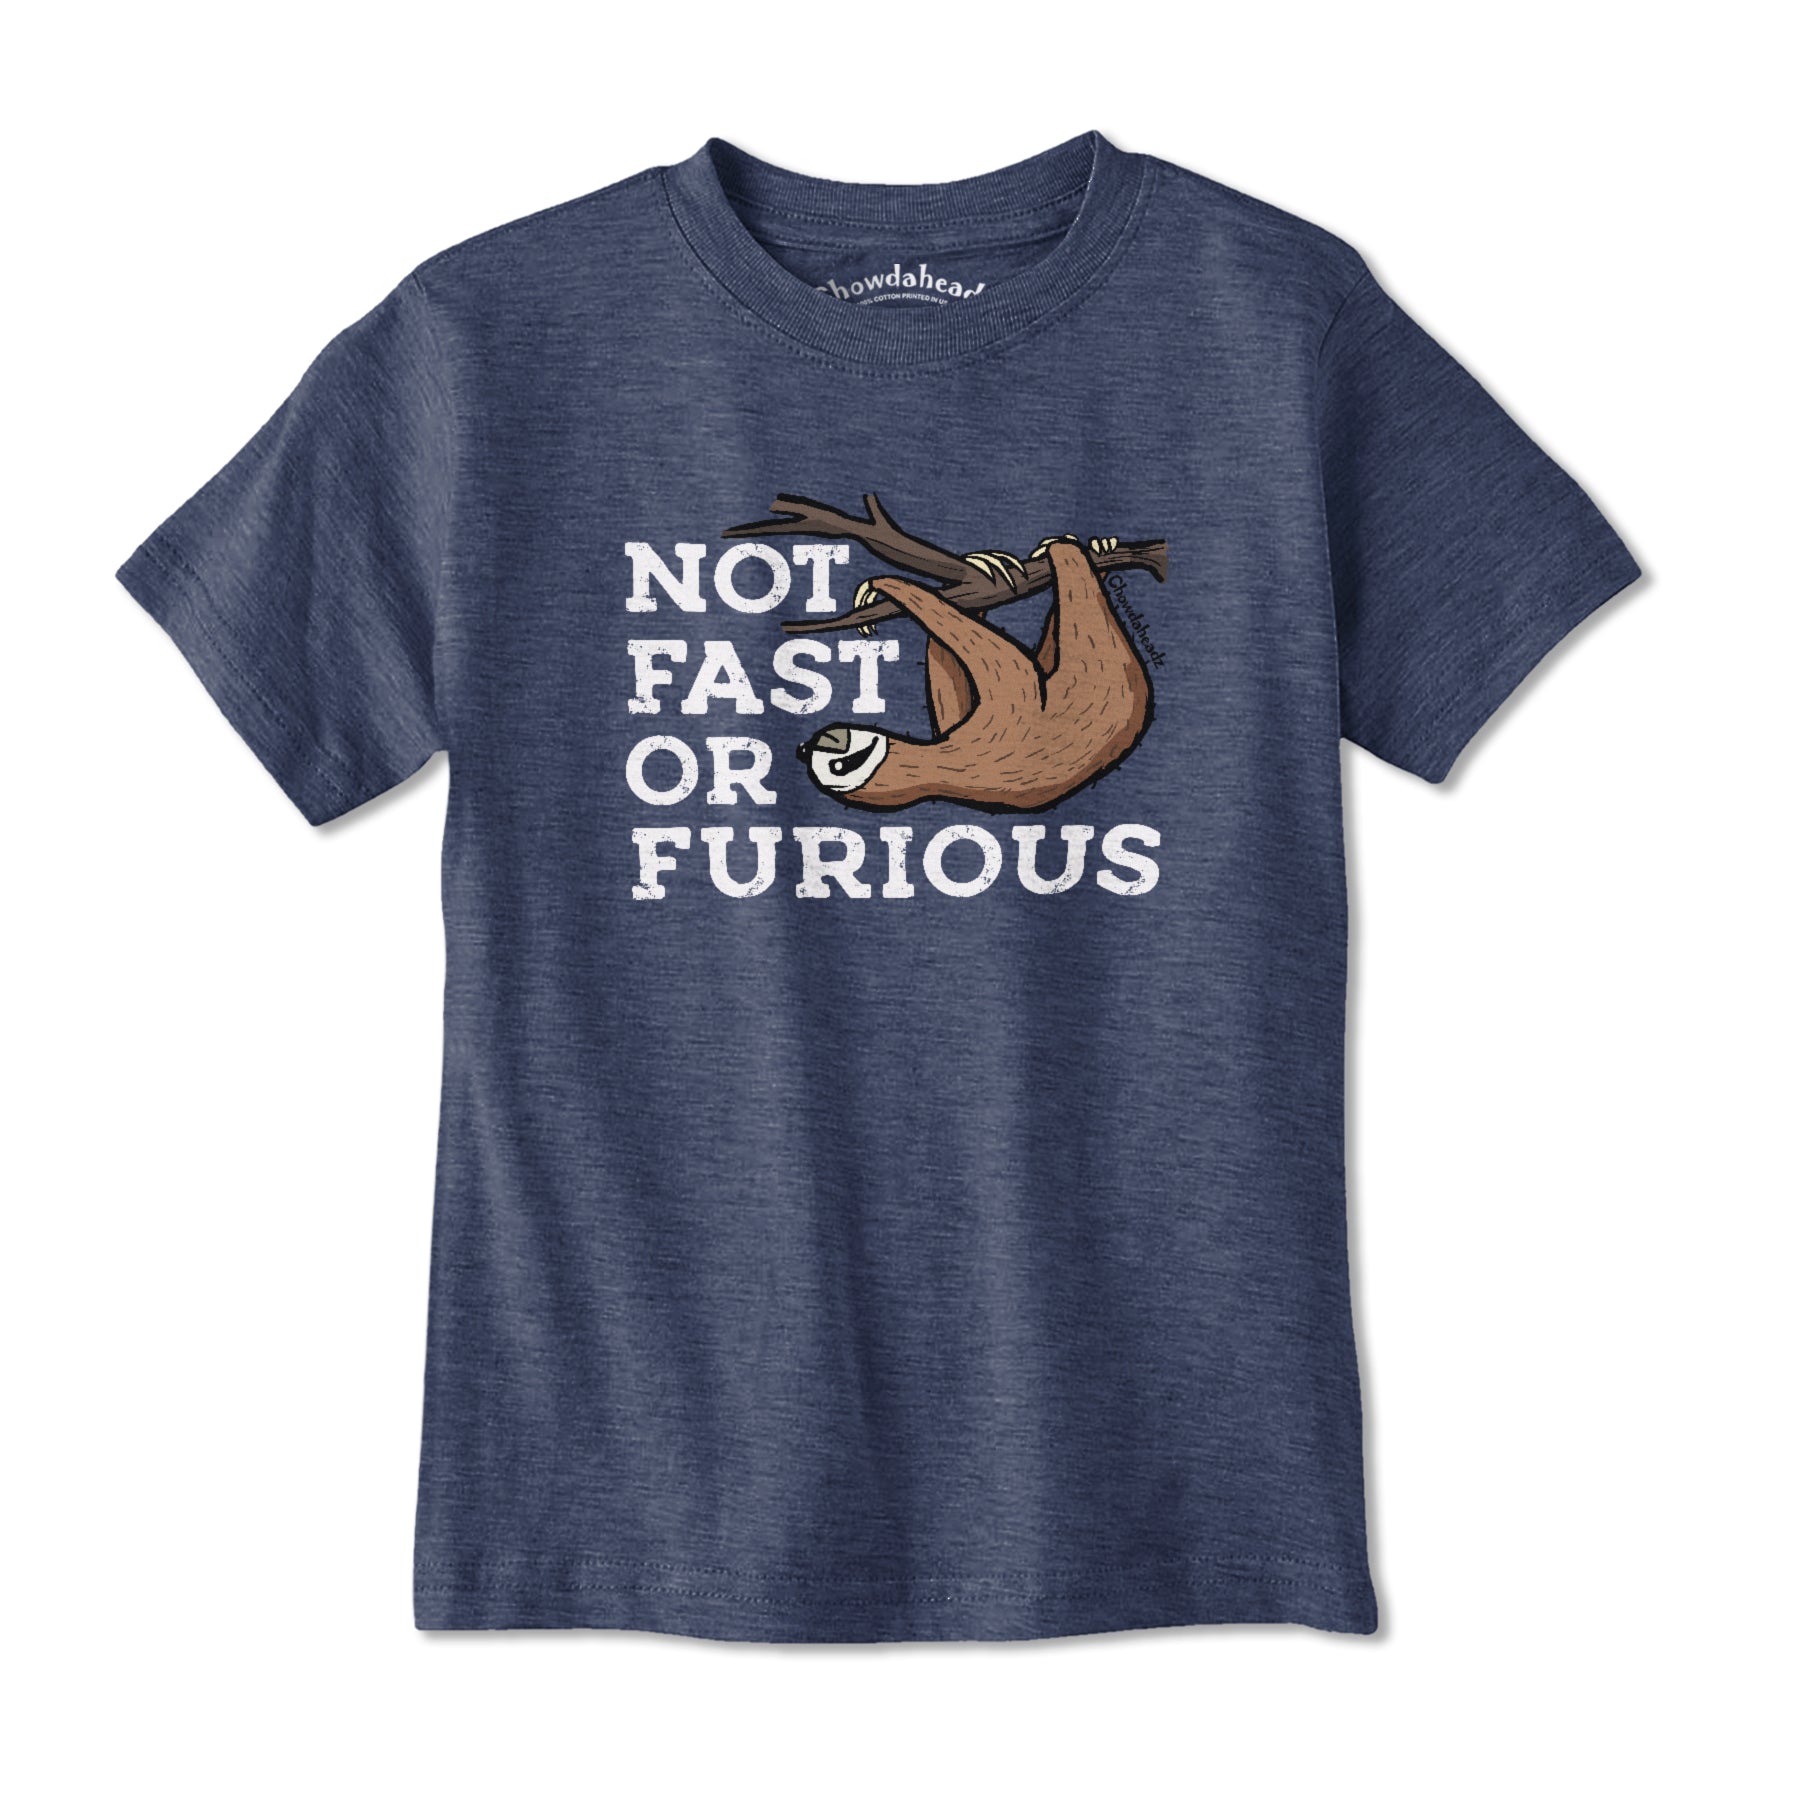 Not Fast Or Furious Youth T-shirt - Chowdaheadz